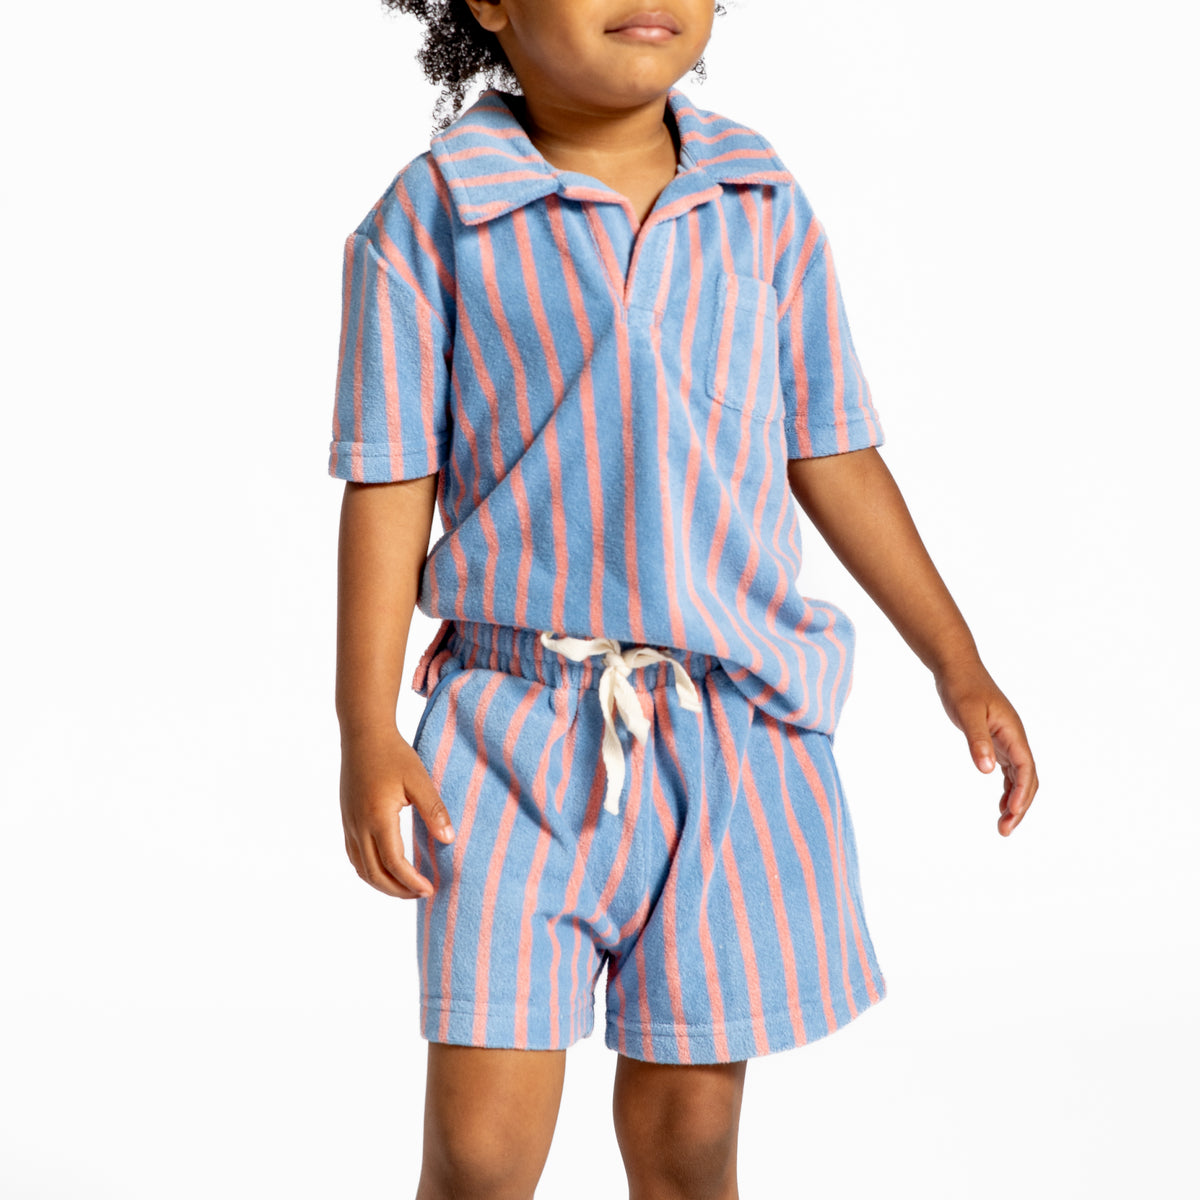 Boys Maritime Stripe French Terry Shorts